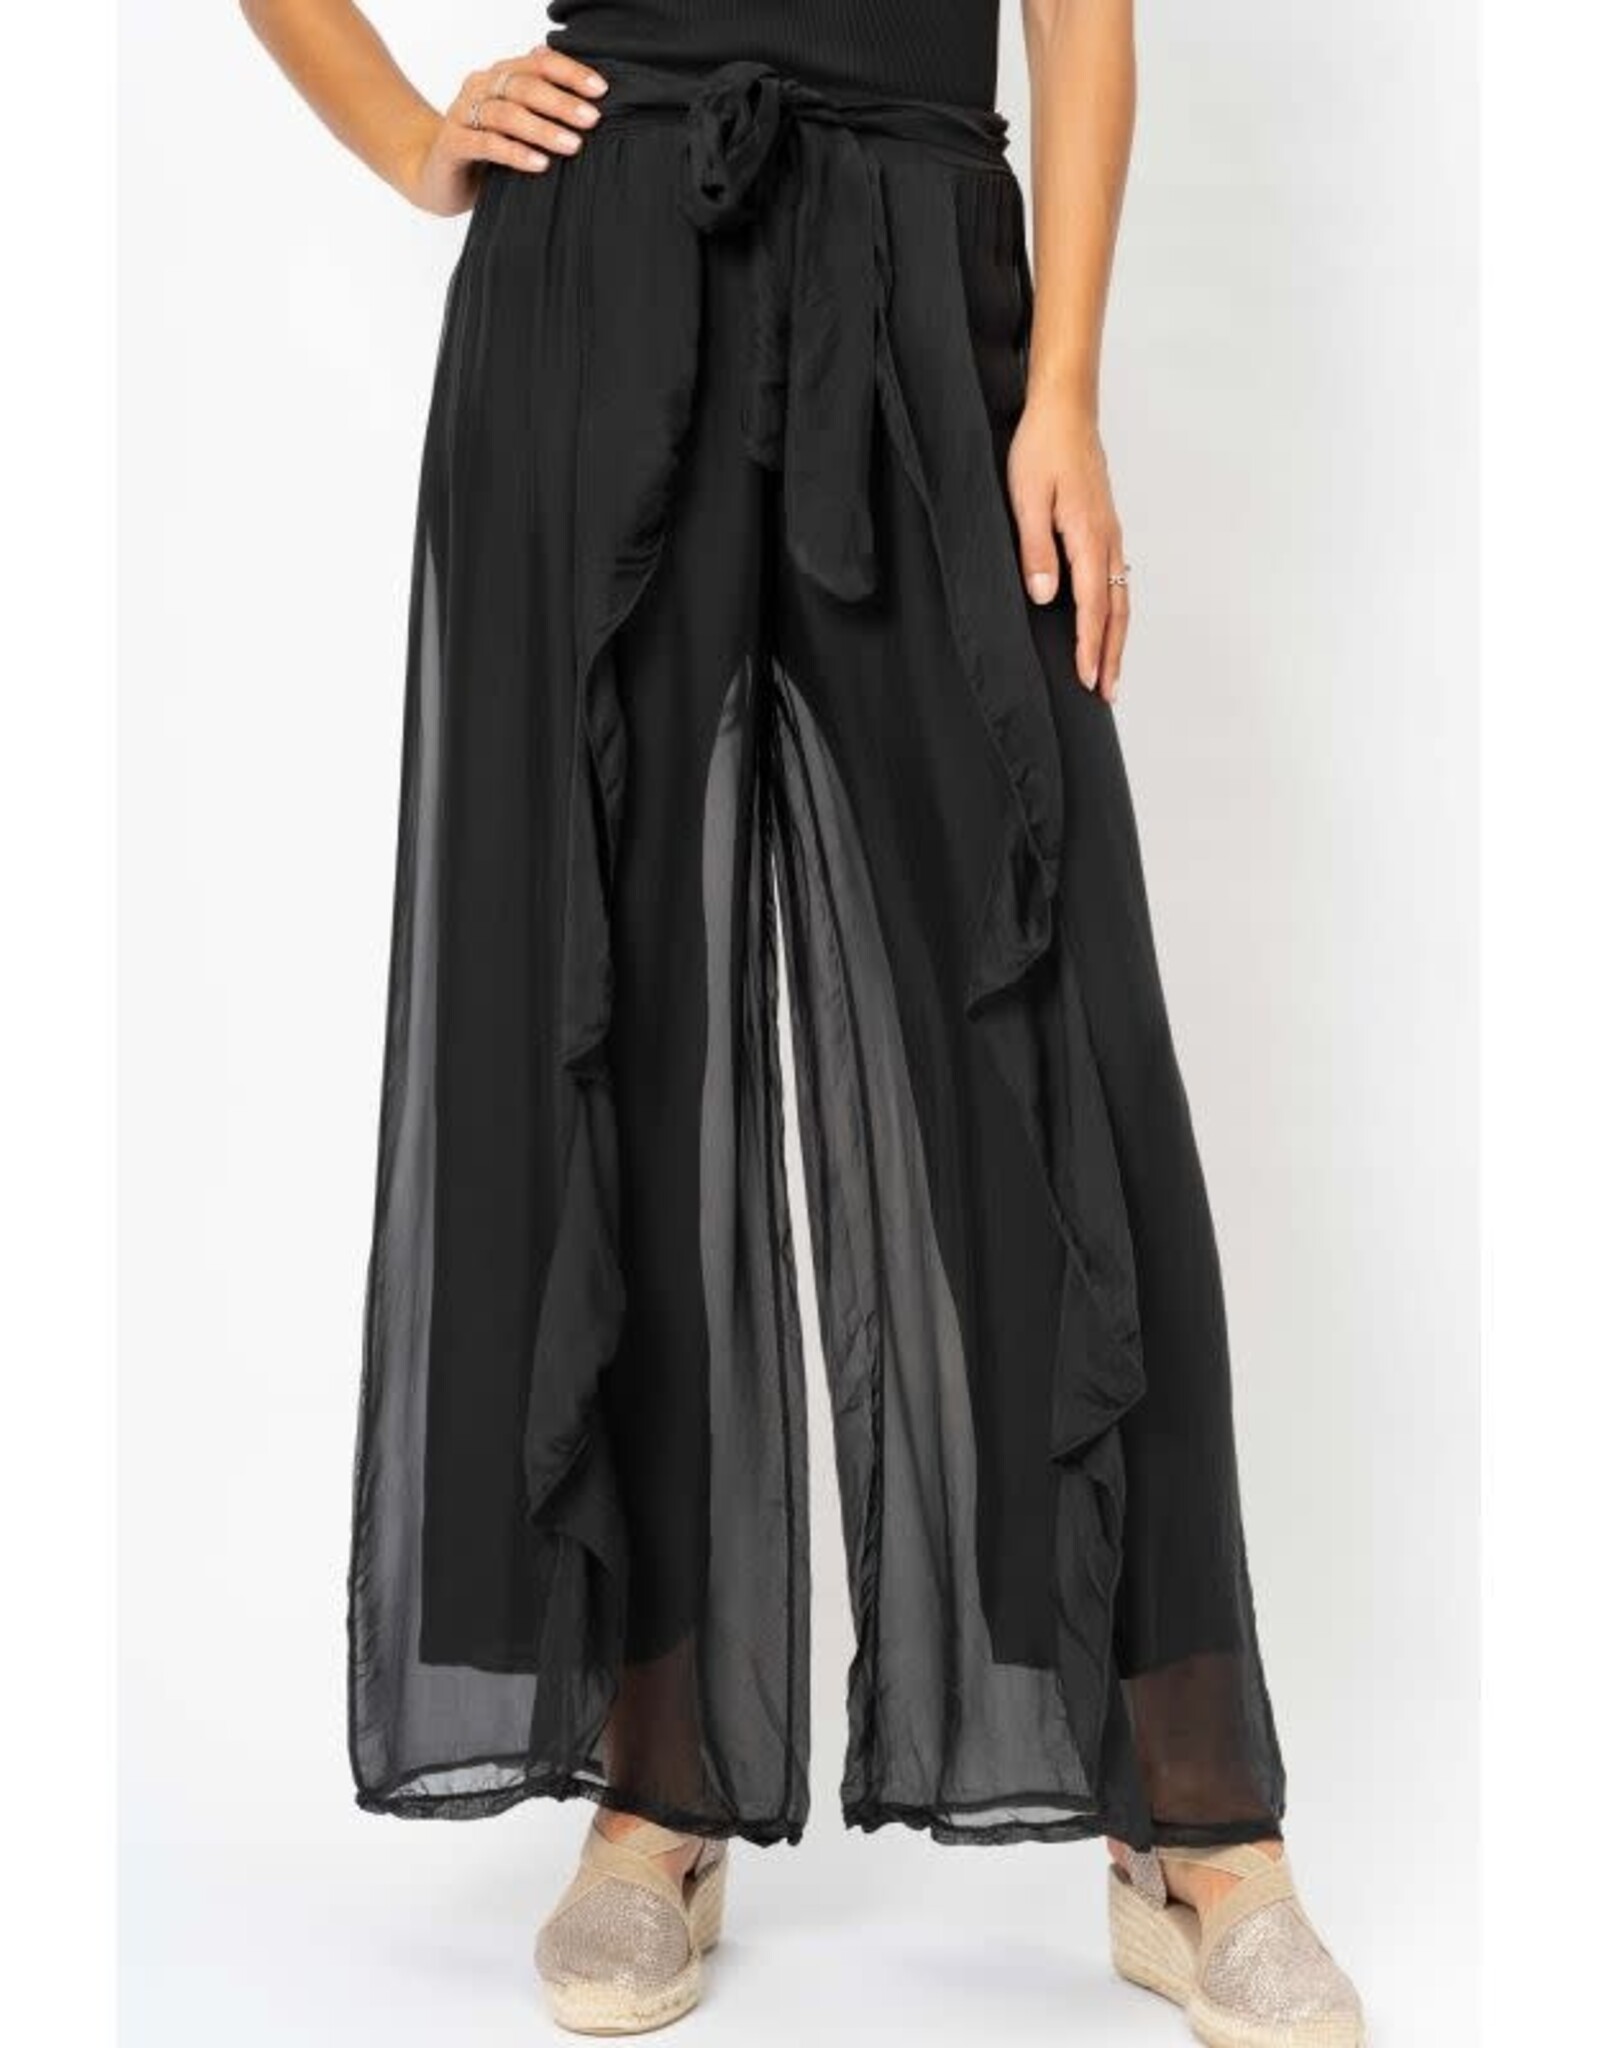 Black Silk Pant Ruffle Detail on Front - Evelie Blu Boutique